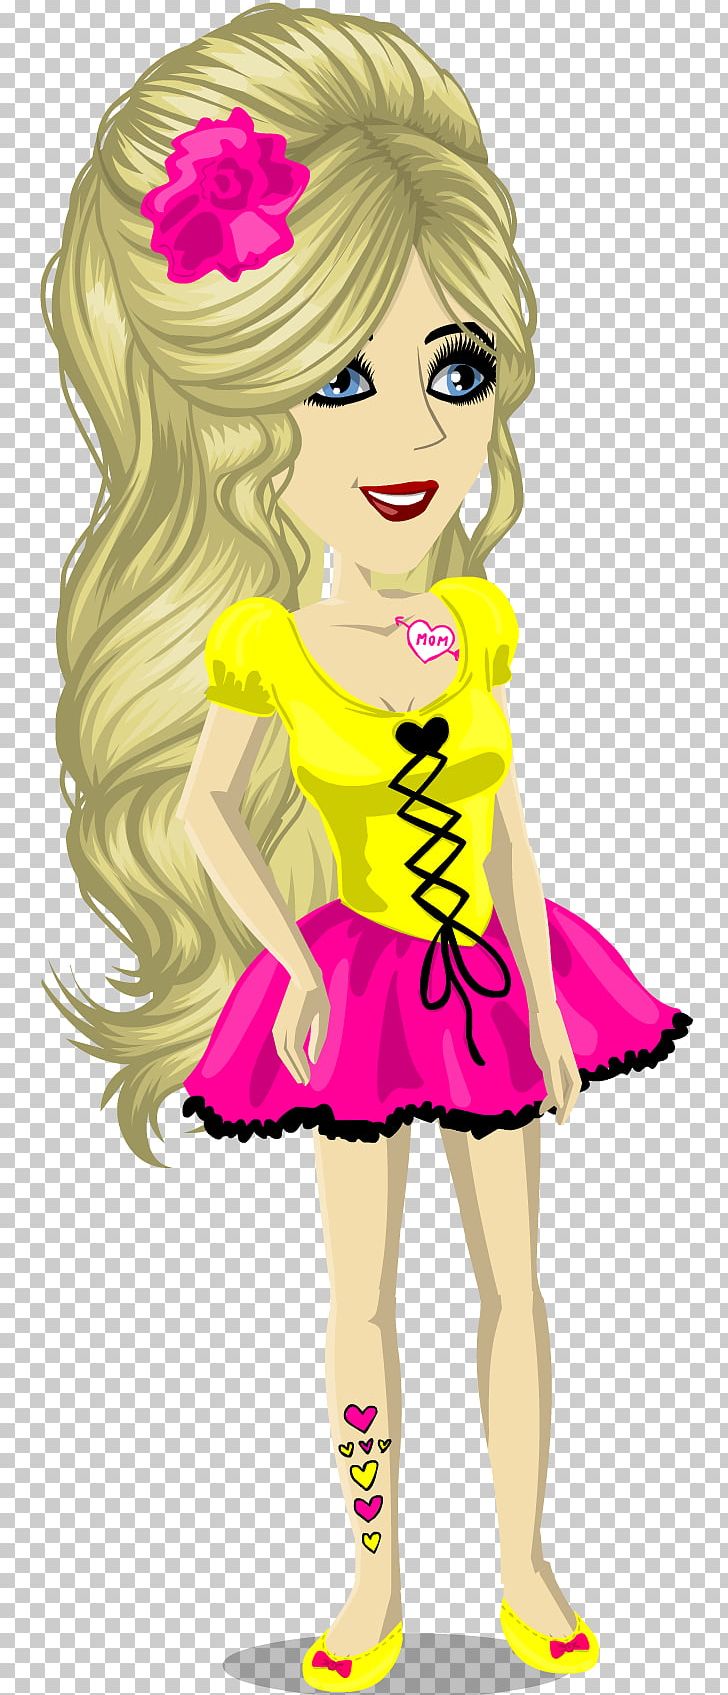 MovieStarPlanet Clothing Actor Film Dress PNG, Clipart, Actor, Art, Barbie, Brown Hair, Cartoon Free PNG Download